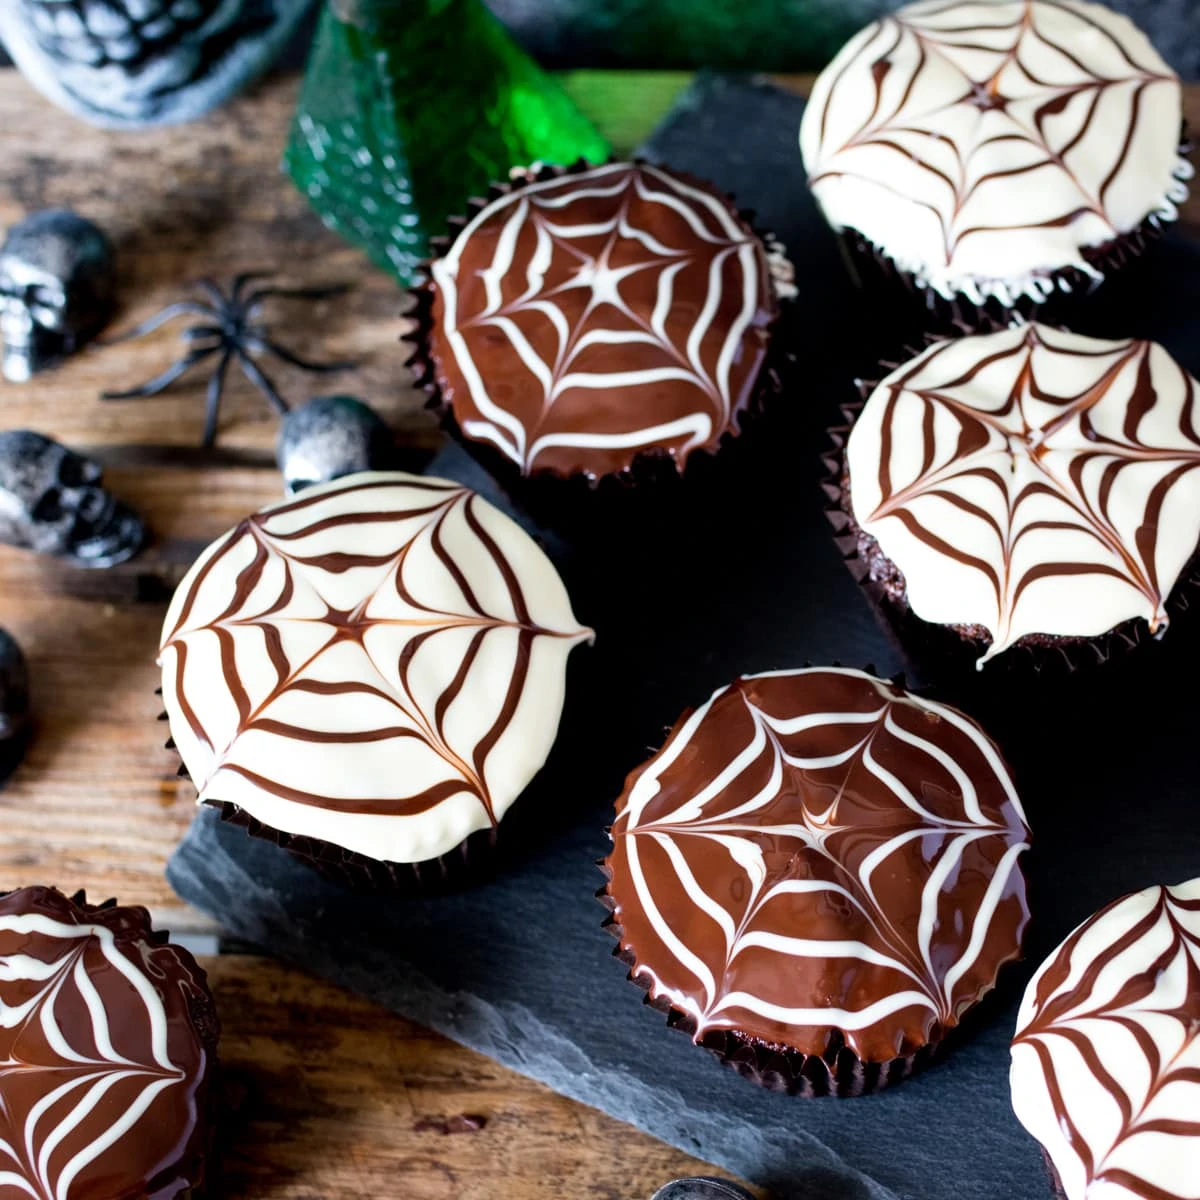 Chocolate Halloween cupcakes with spiderweb patterns in the topping placed on a dark slate background with toy skulls and spiders in the background.